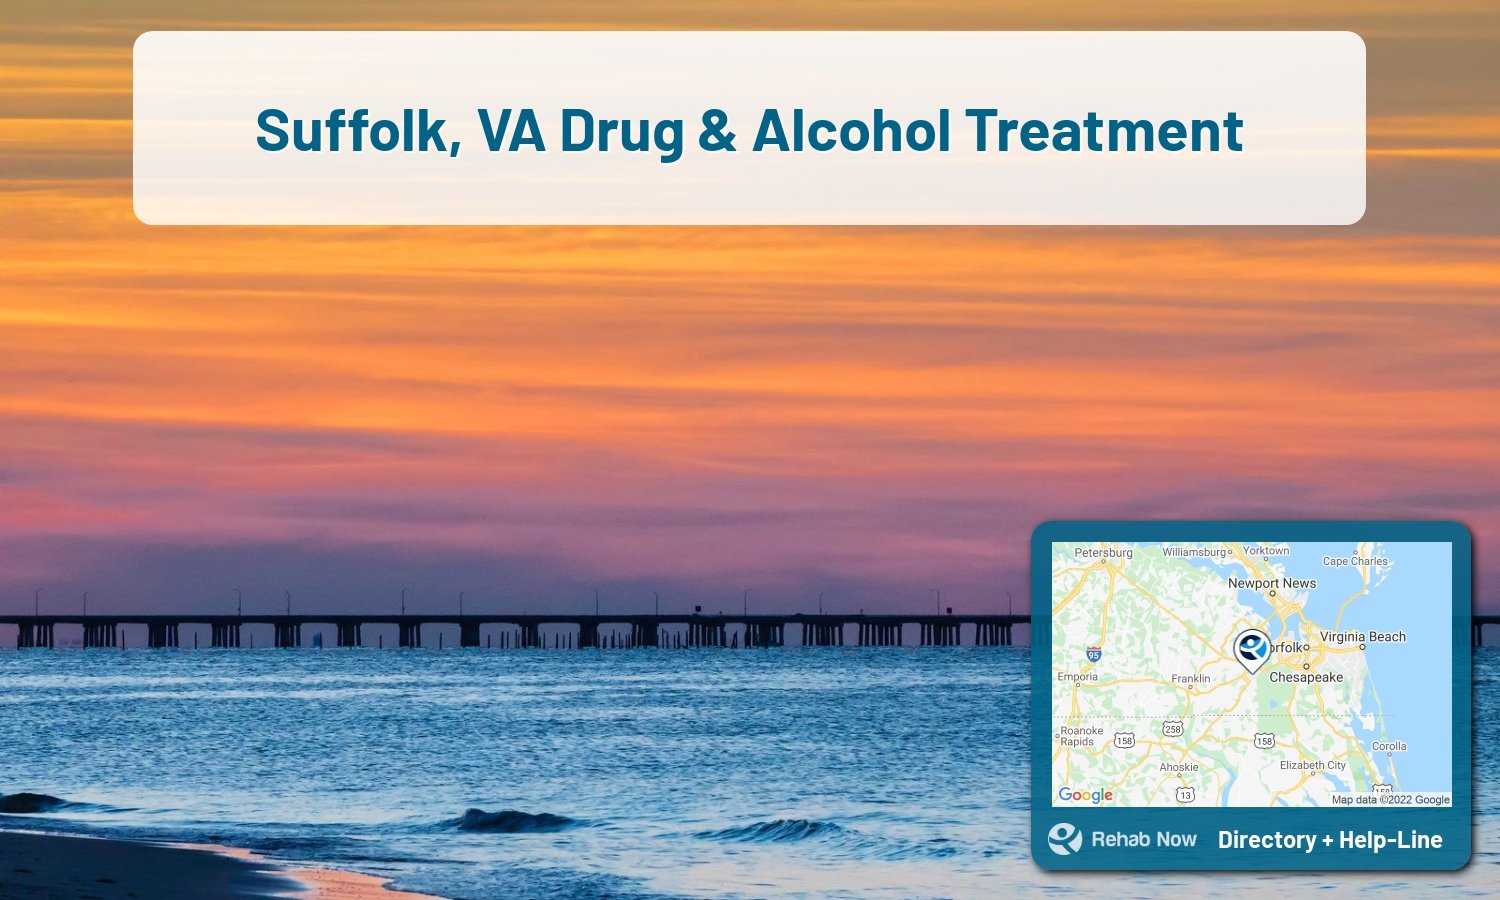 List of alcohol and drug treatment centers near you in Suffolk, Virginia. Research certifications, programs, methods, pricing, and more.